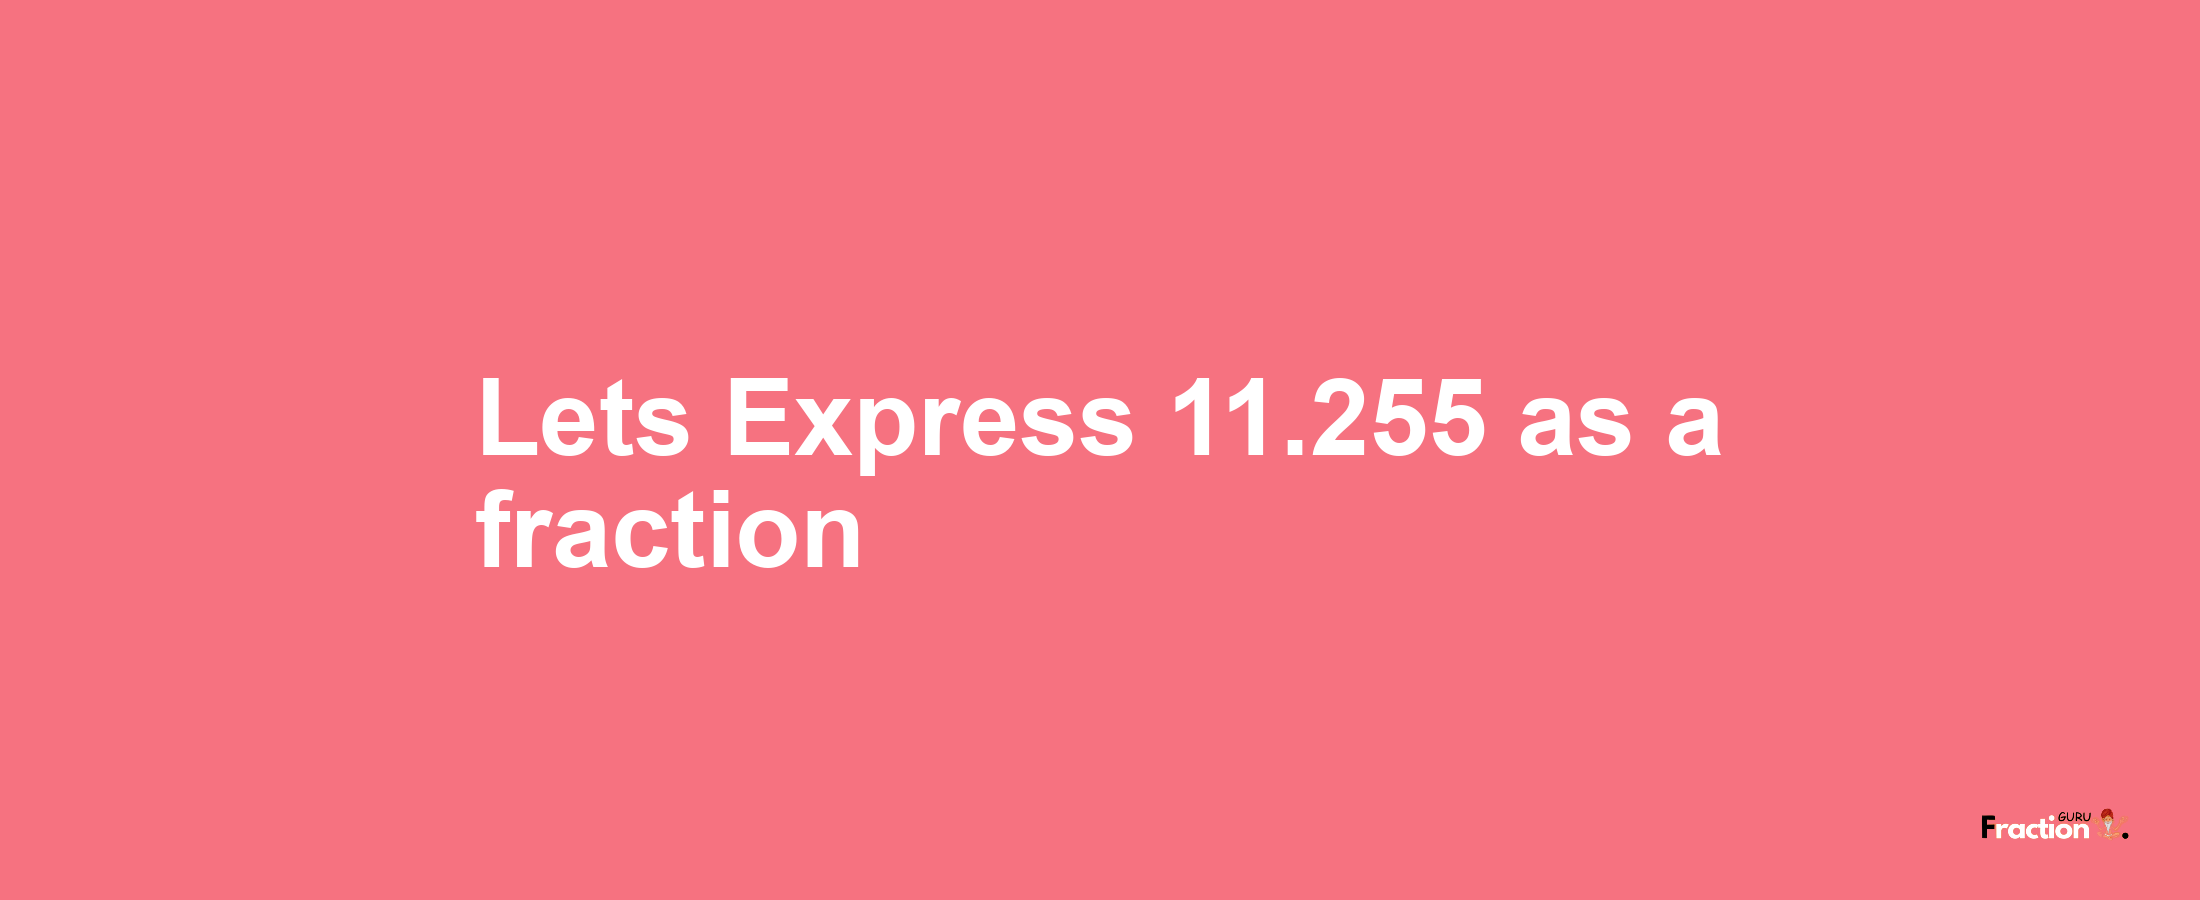 Lets Express 11.255 as afraction